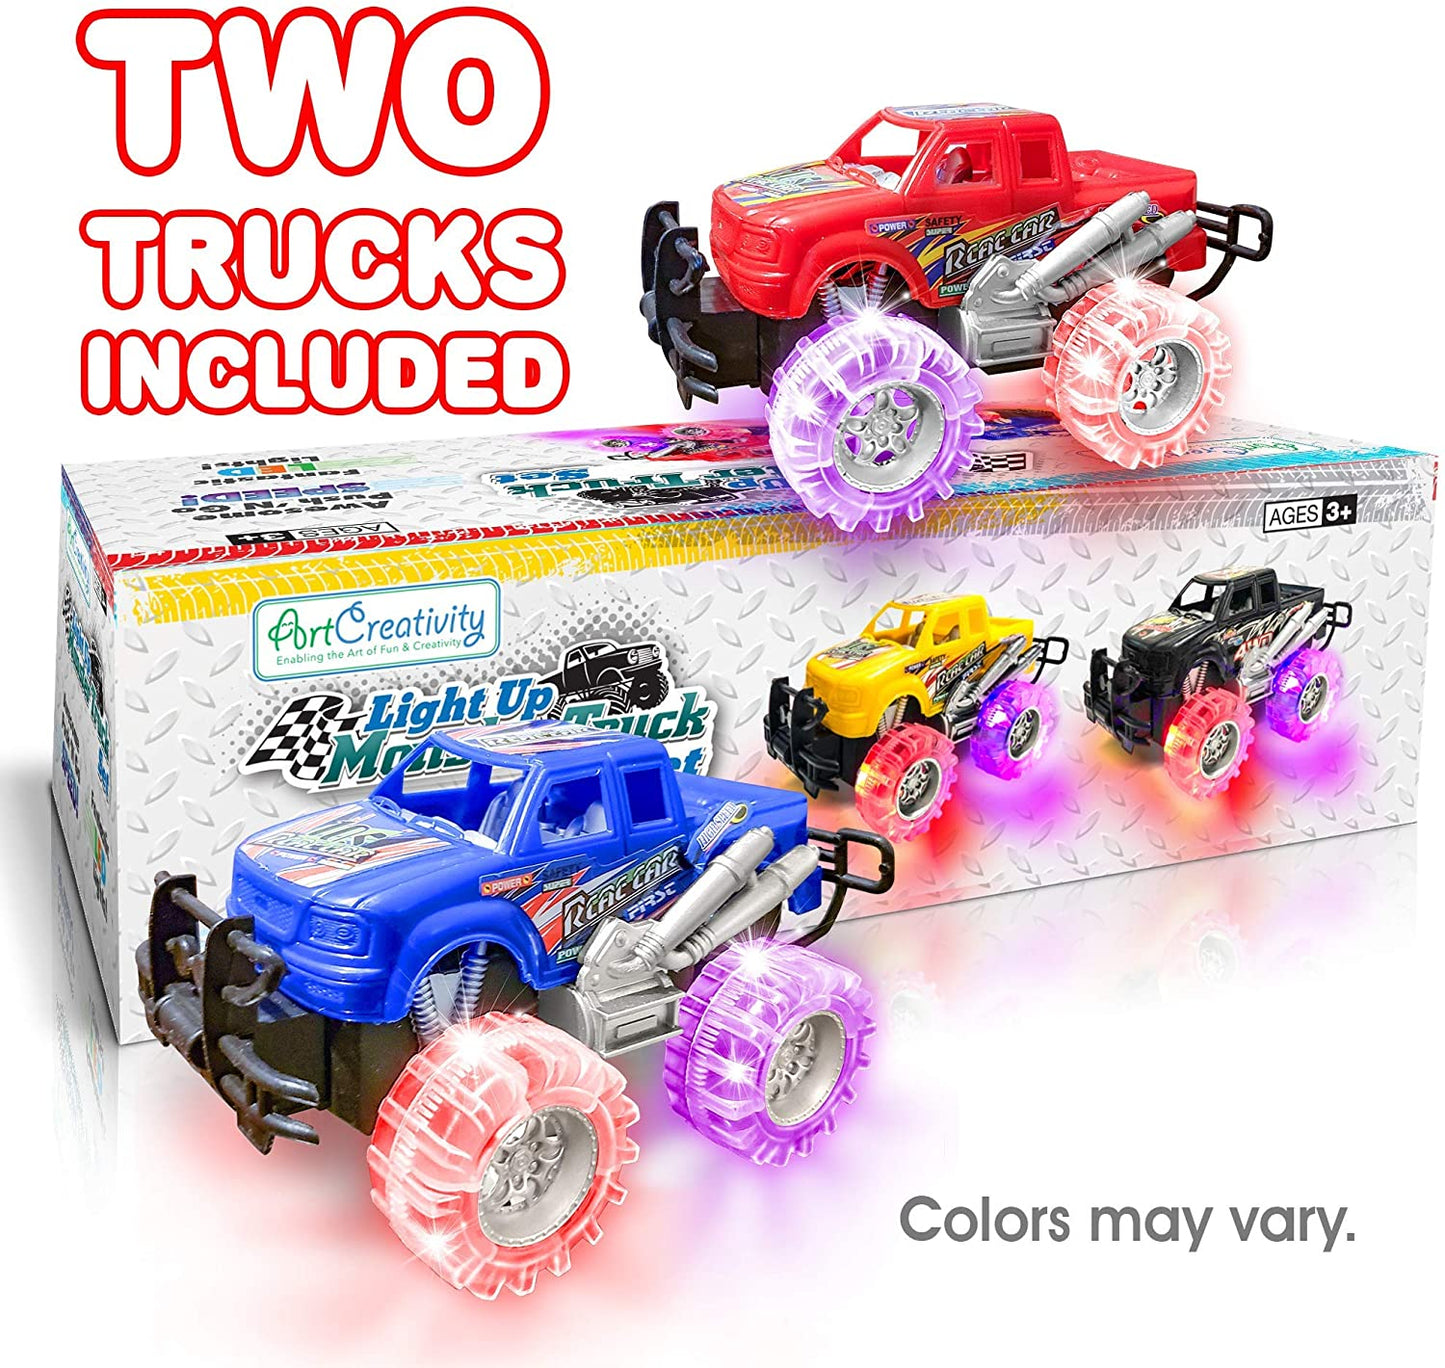 Light up Monster Truck Set for Boys and Girls by Artcreativity - Set Includes 2, 6 Inch Monster Trucks with Beautiful Flashing LED Tires - Push N Go Toy Cars Fun Gift for Kids - for Ages 3+